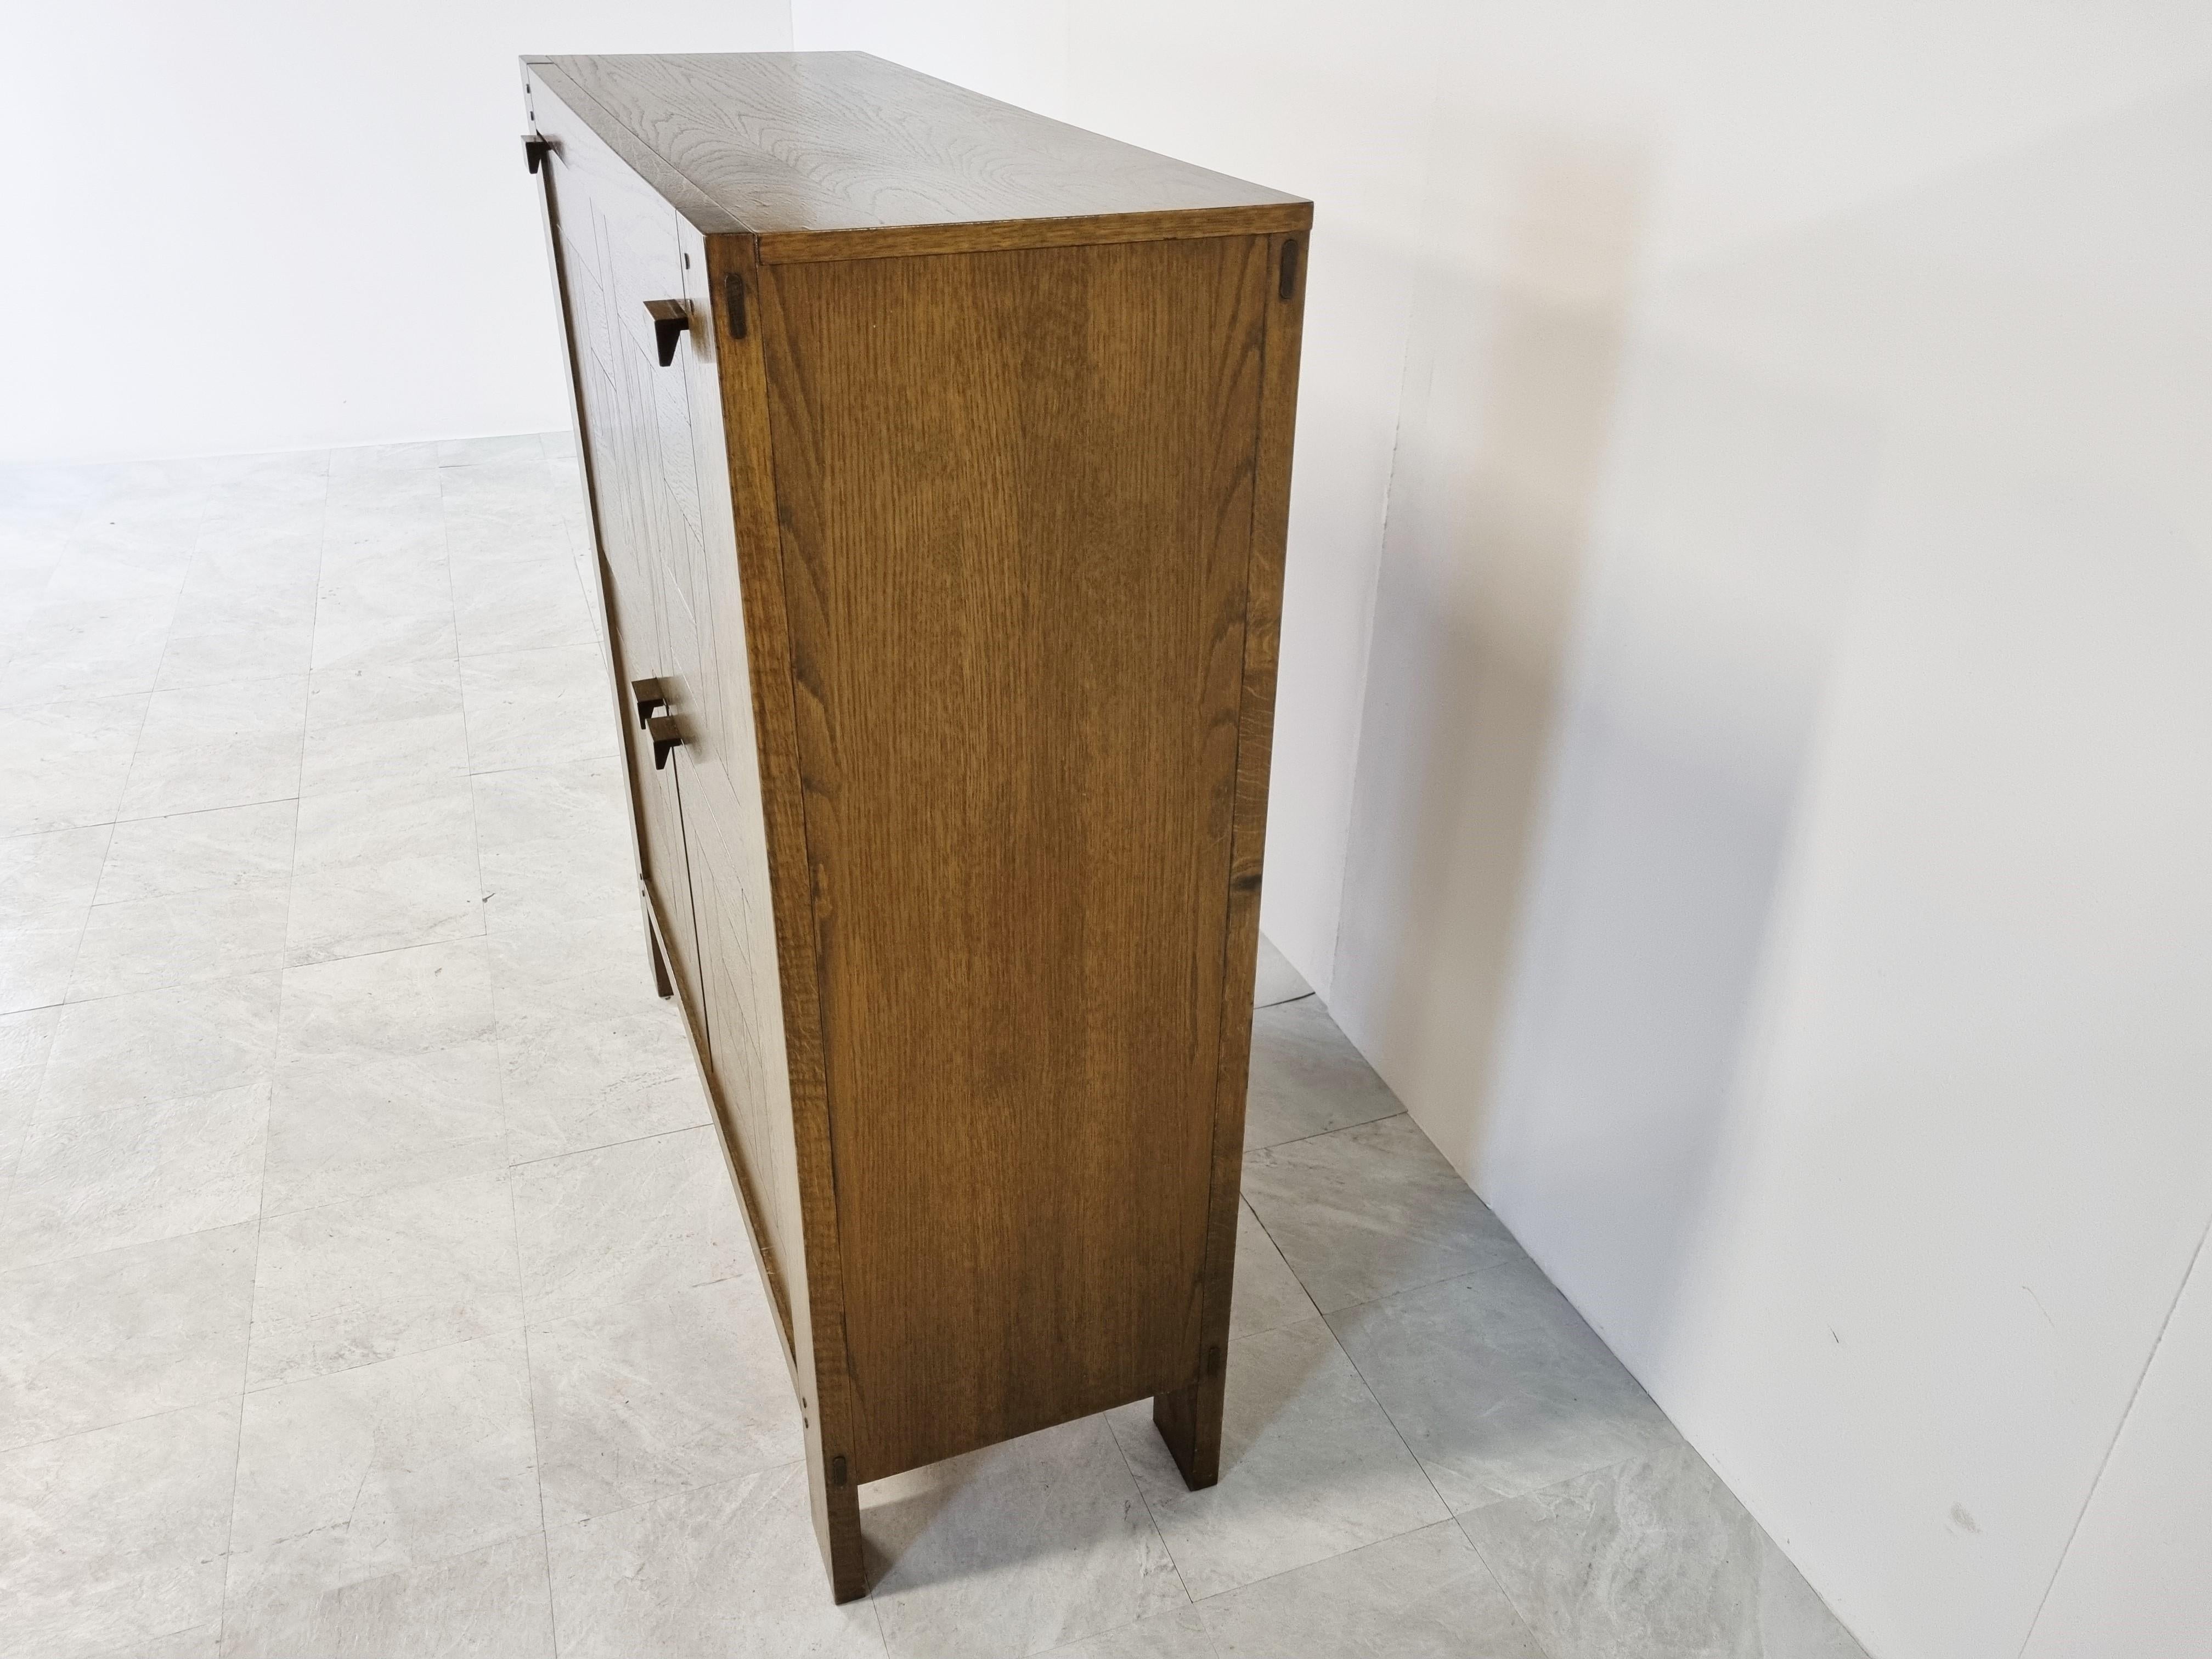 Beautiful minimalist inlaid wood bar cabinet.

The cabinet consists of two doors and a folding down door revealing a bar compartment.

Nicely shaped handles.

Great timeless design bar cabinet.

Good condition

1960s -